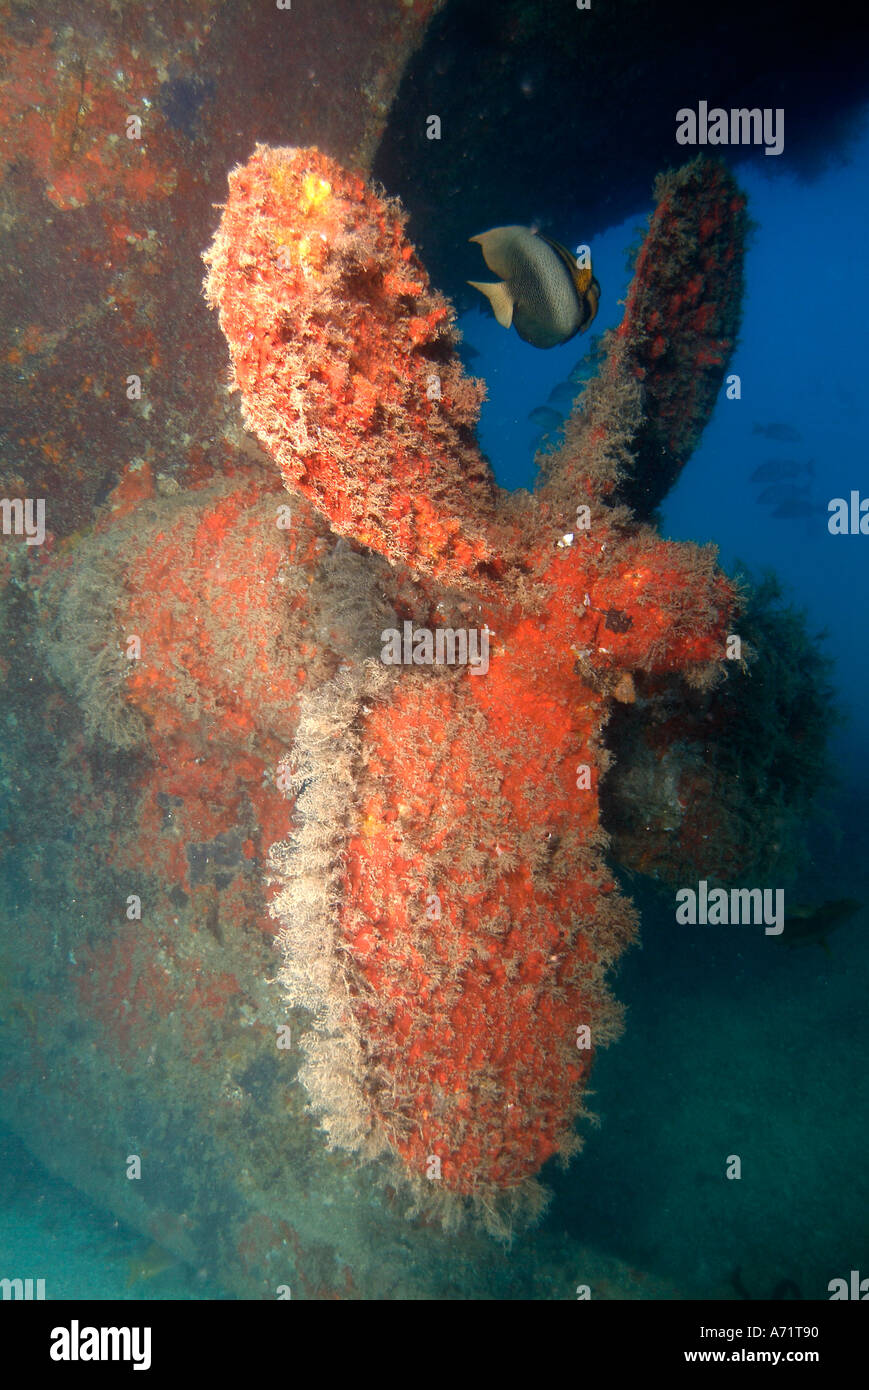 The propeller of the Fang Ming wreck in the sea of Cortez Stock Photo